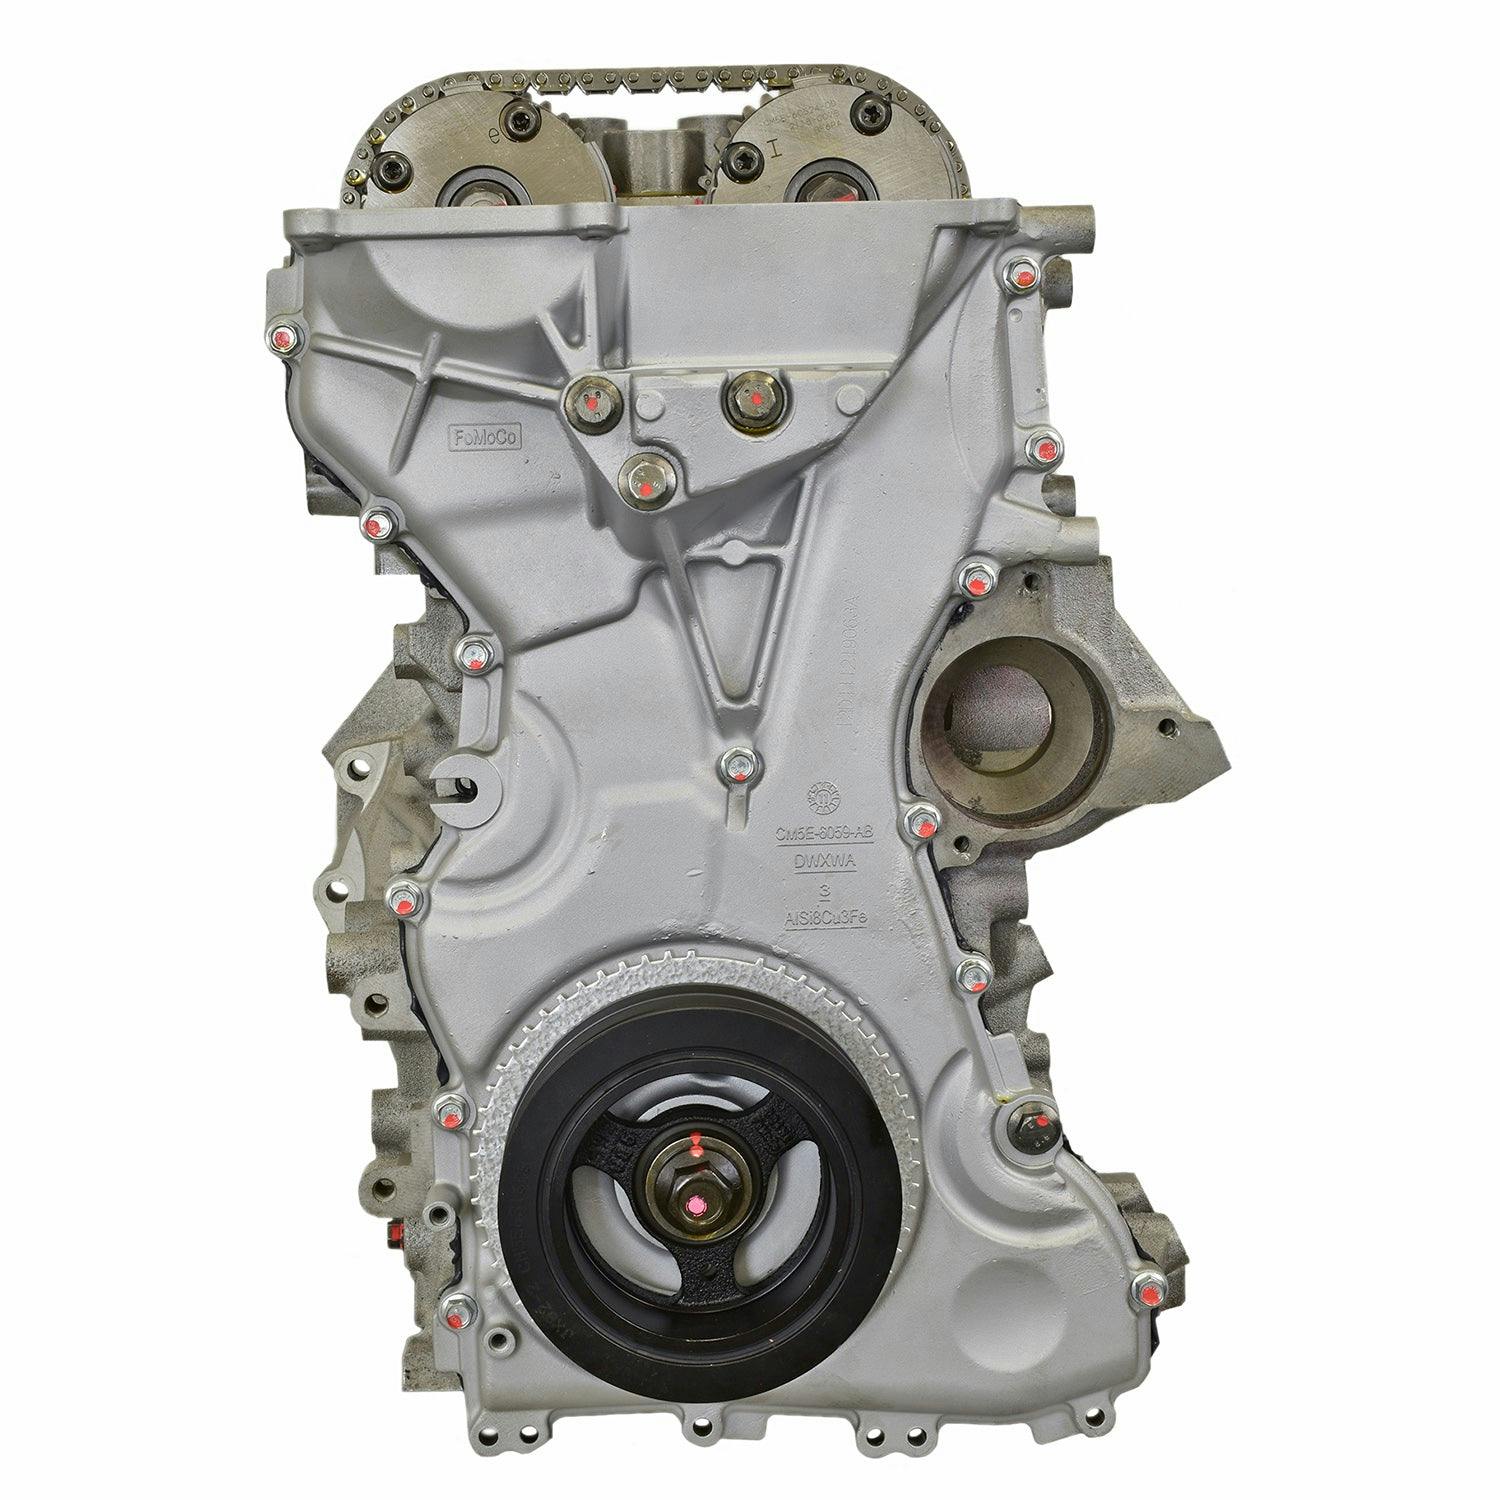 2L Inline-4 Engine for 2015-2018 Ford Focus